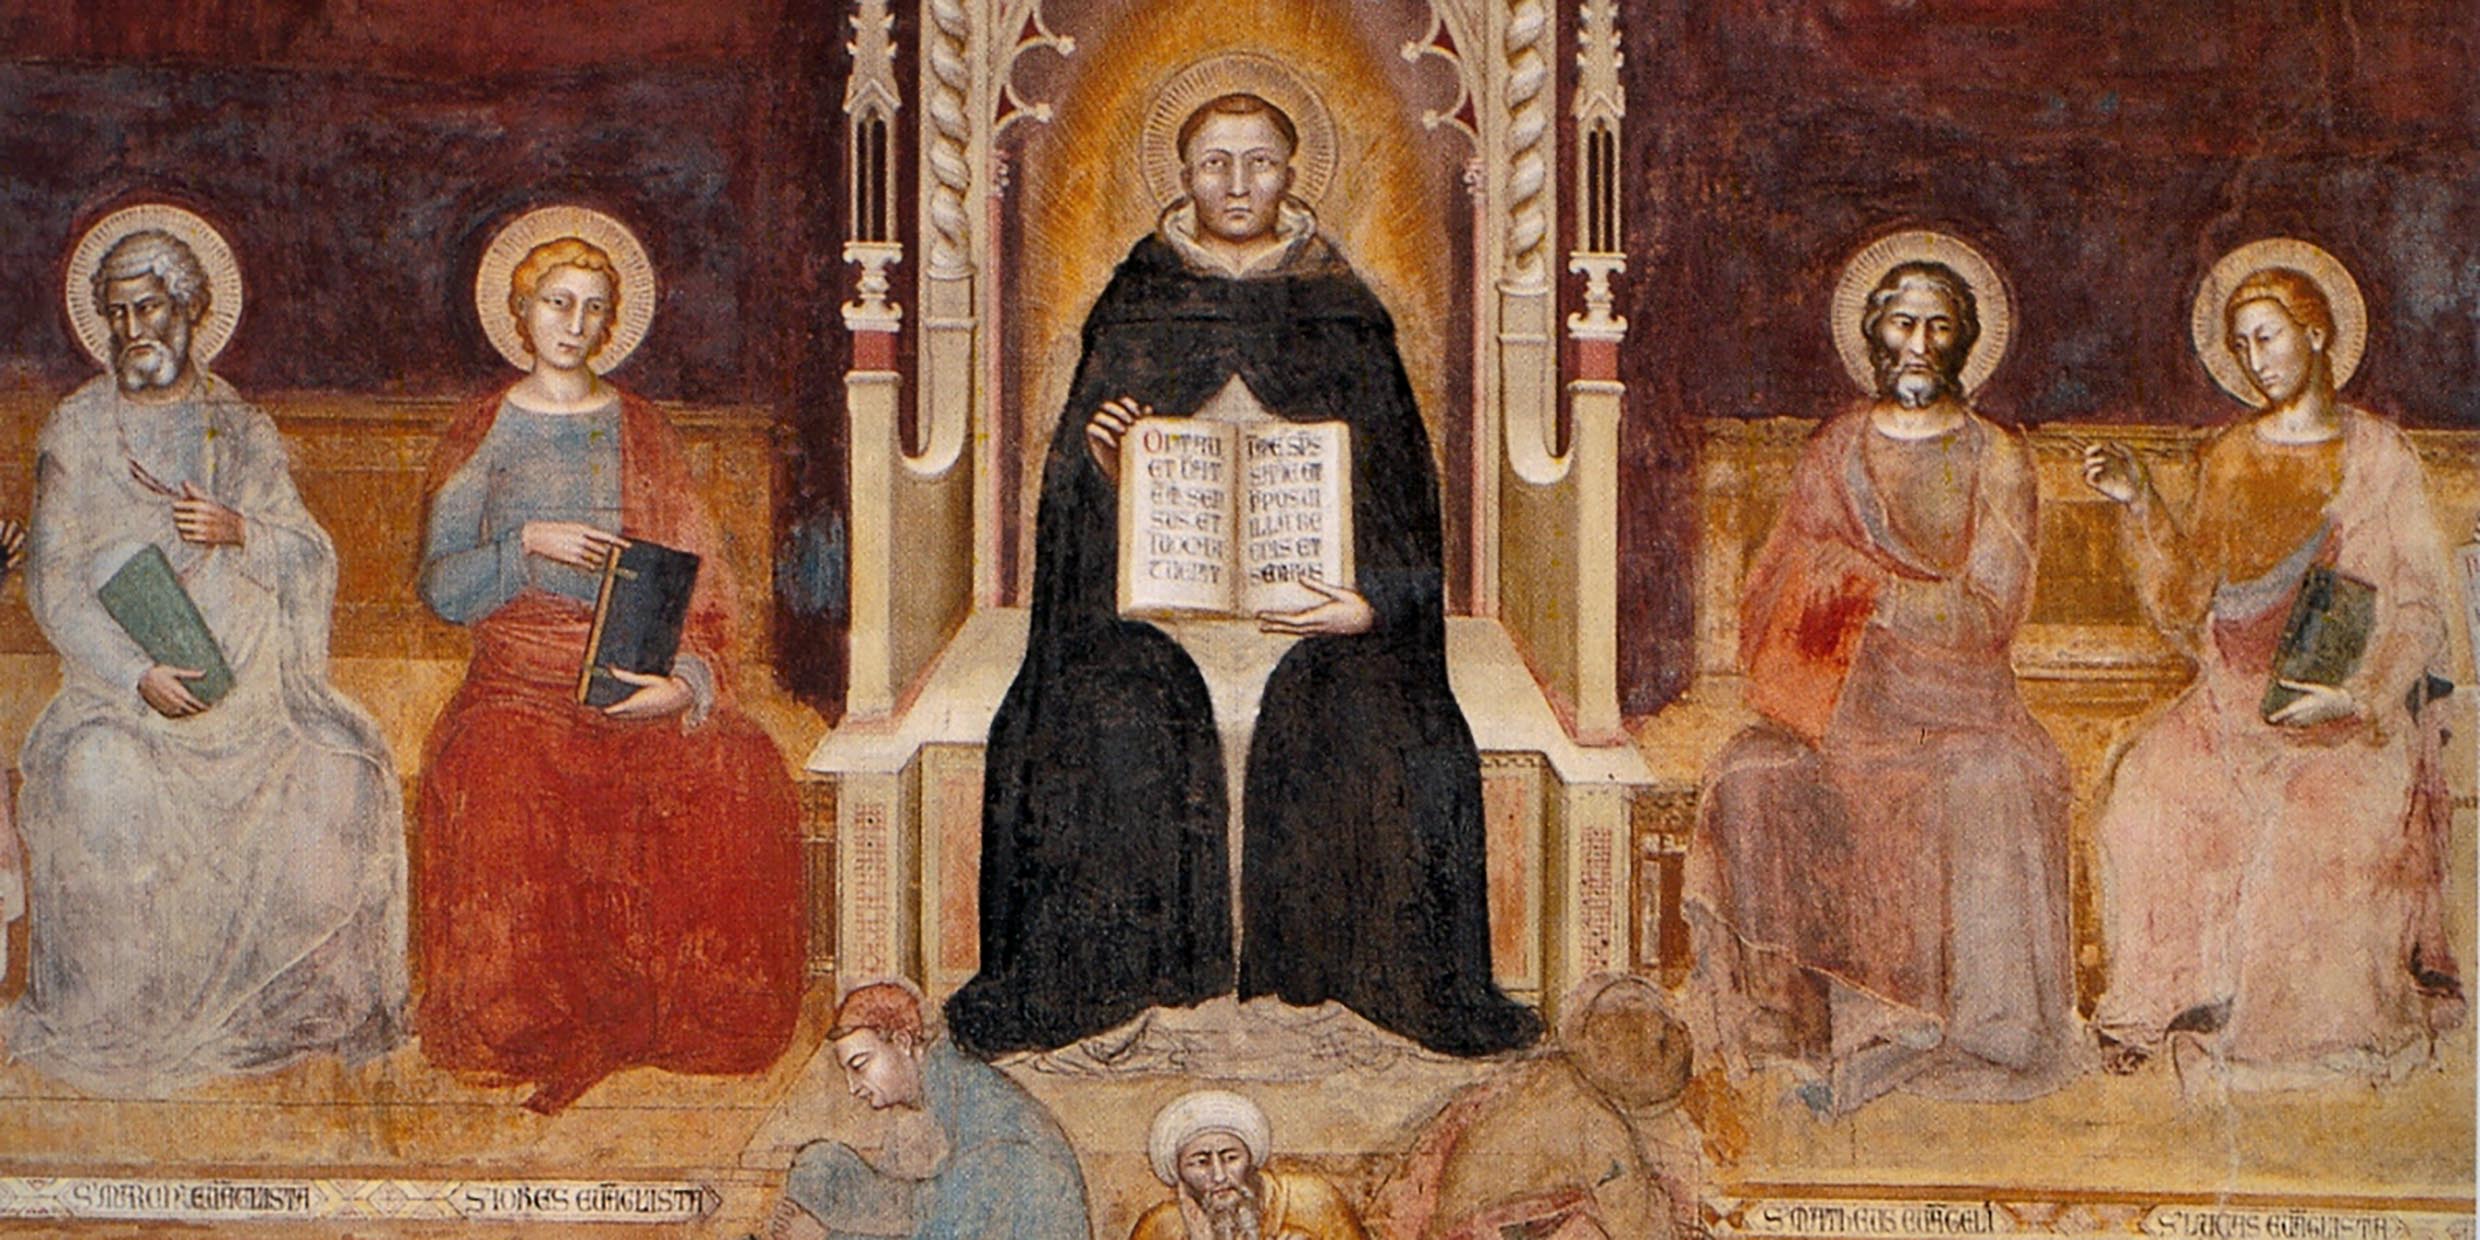 Medieval fresco painting of a robed man seated on a throne holding open a book